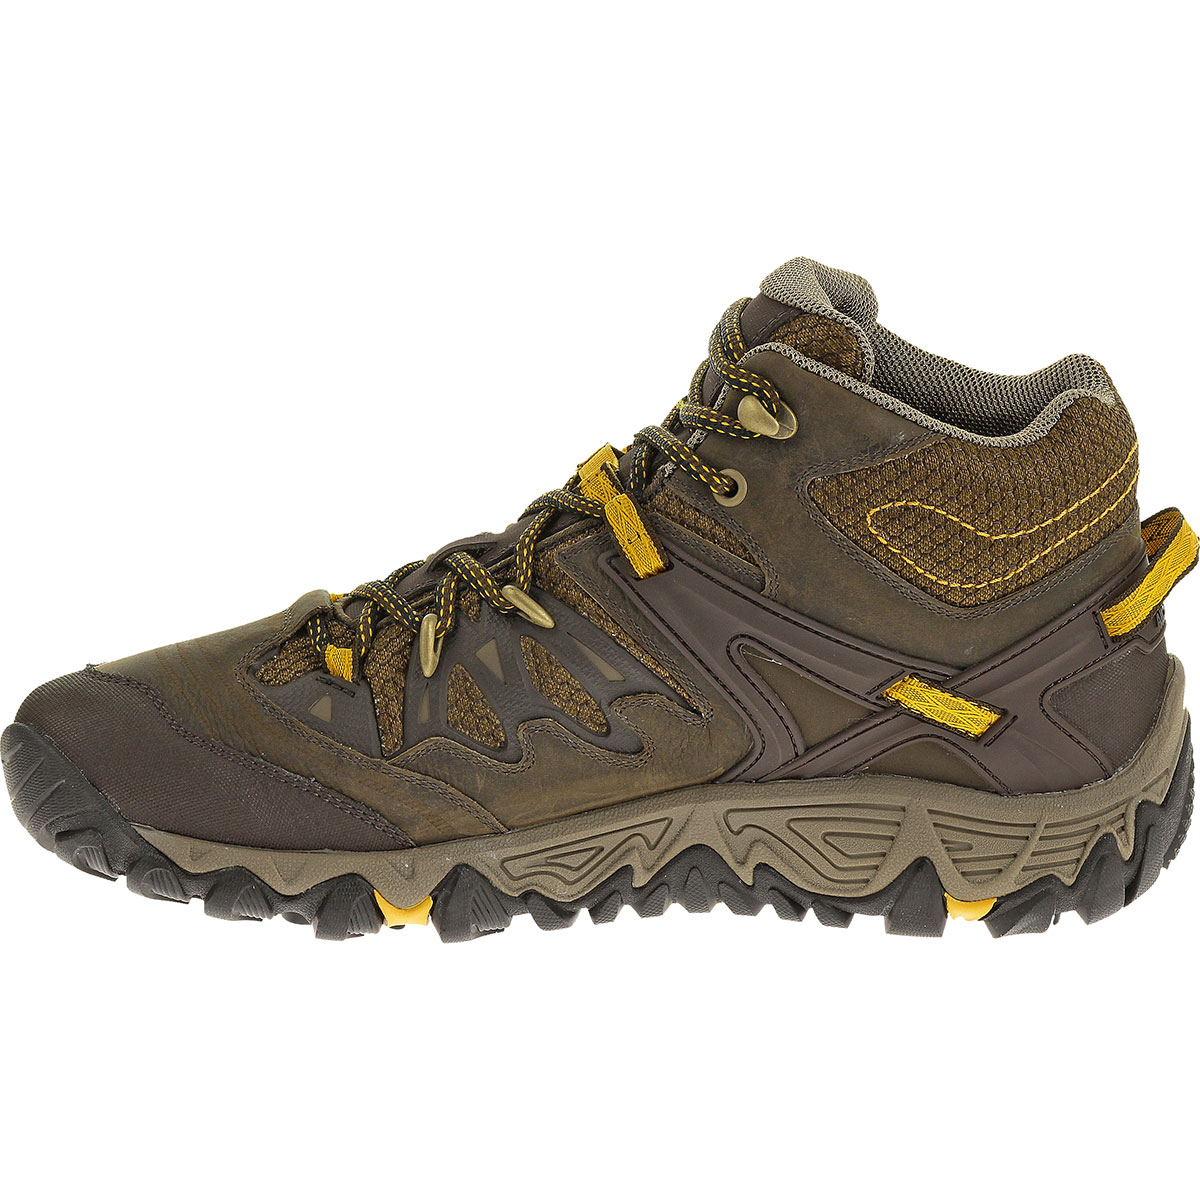 Out Blaze Mid WP Hiking Boots 